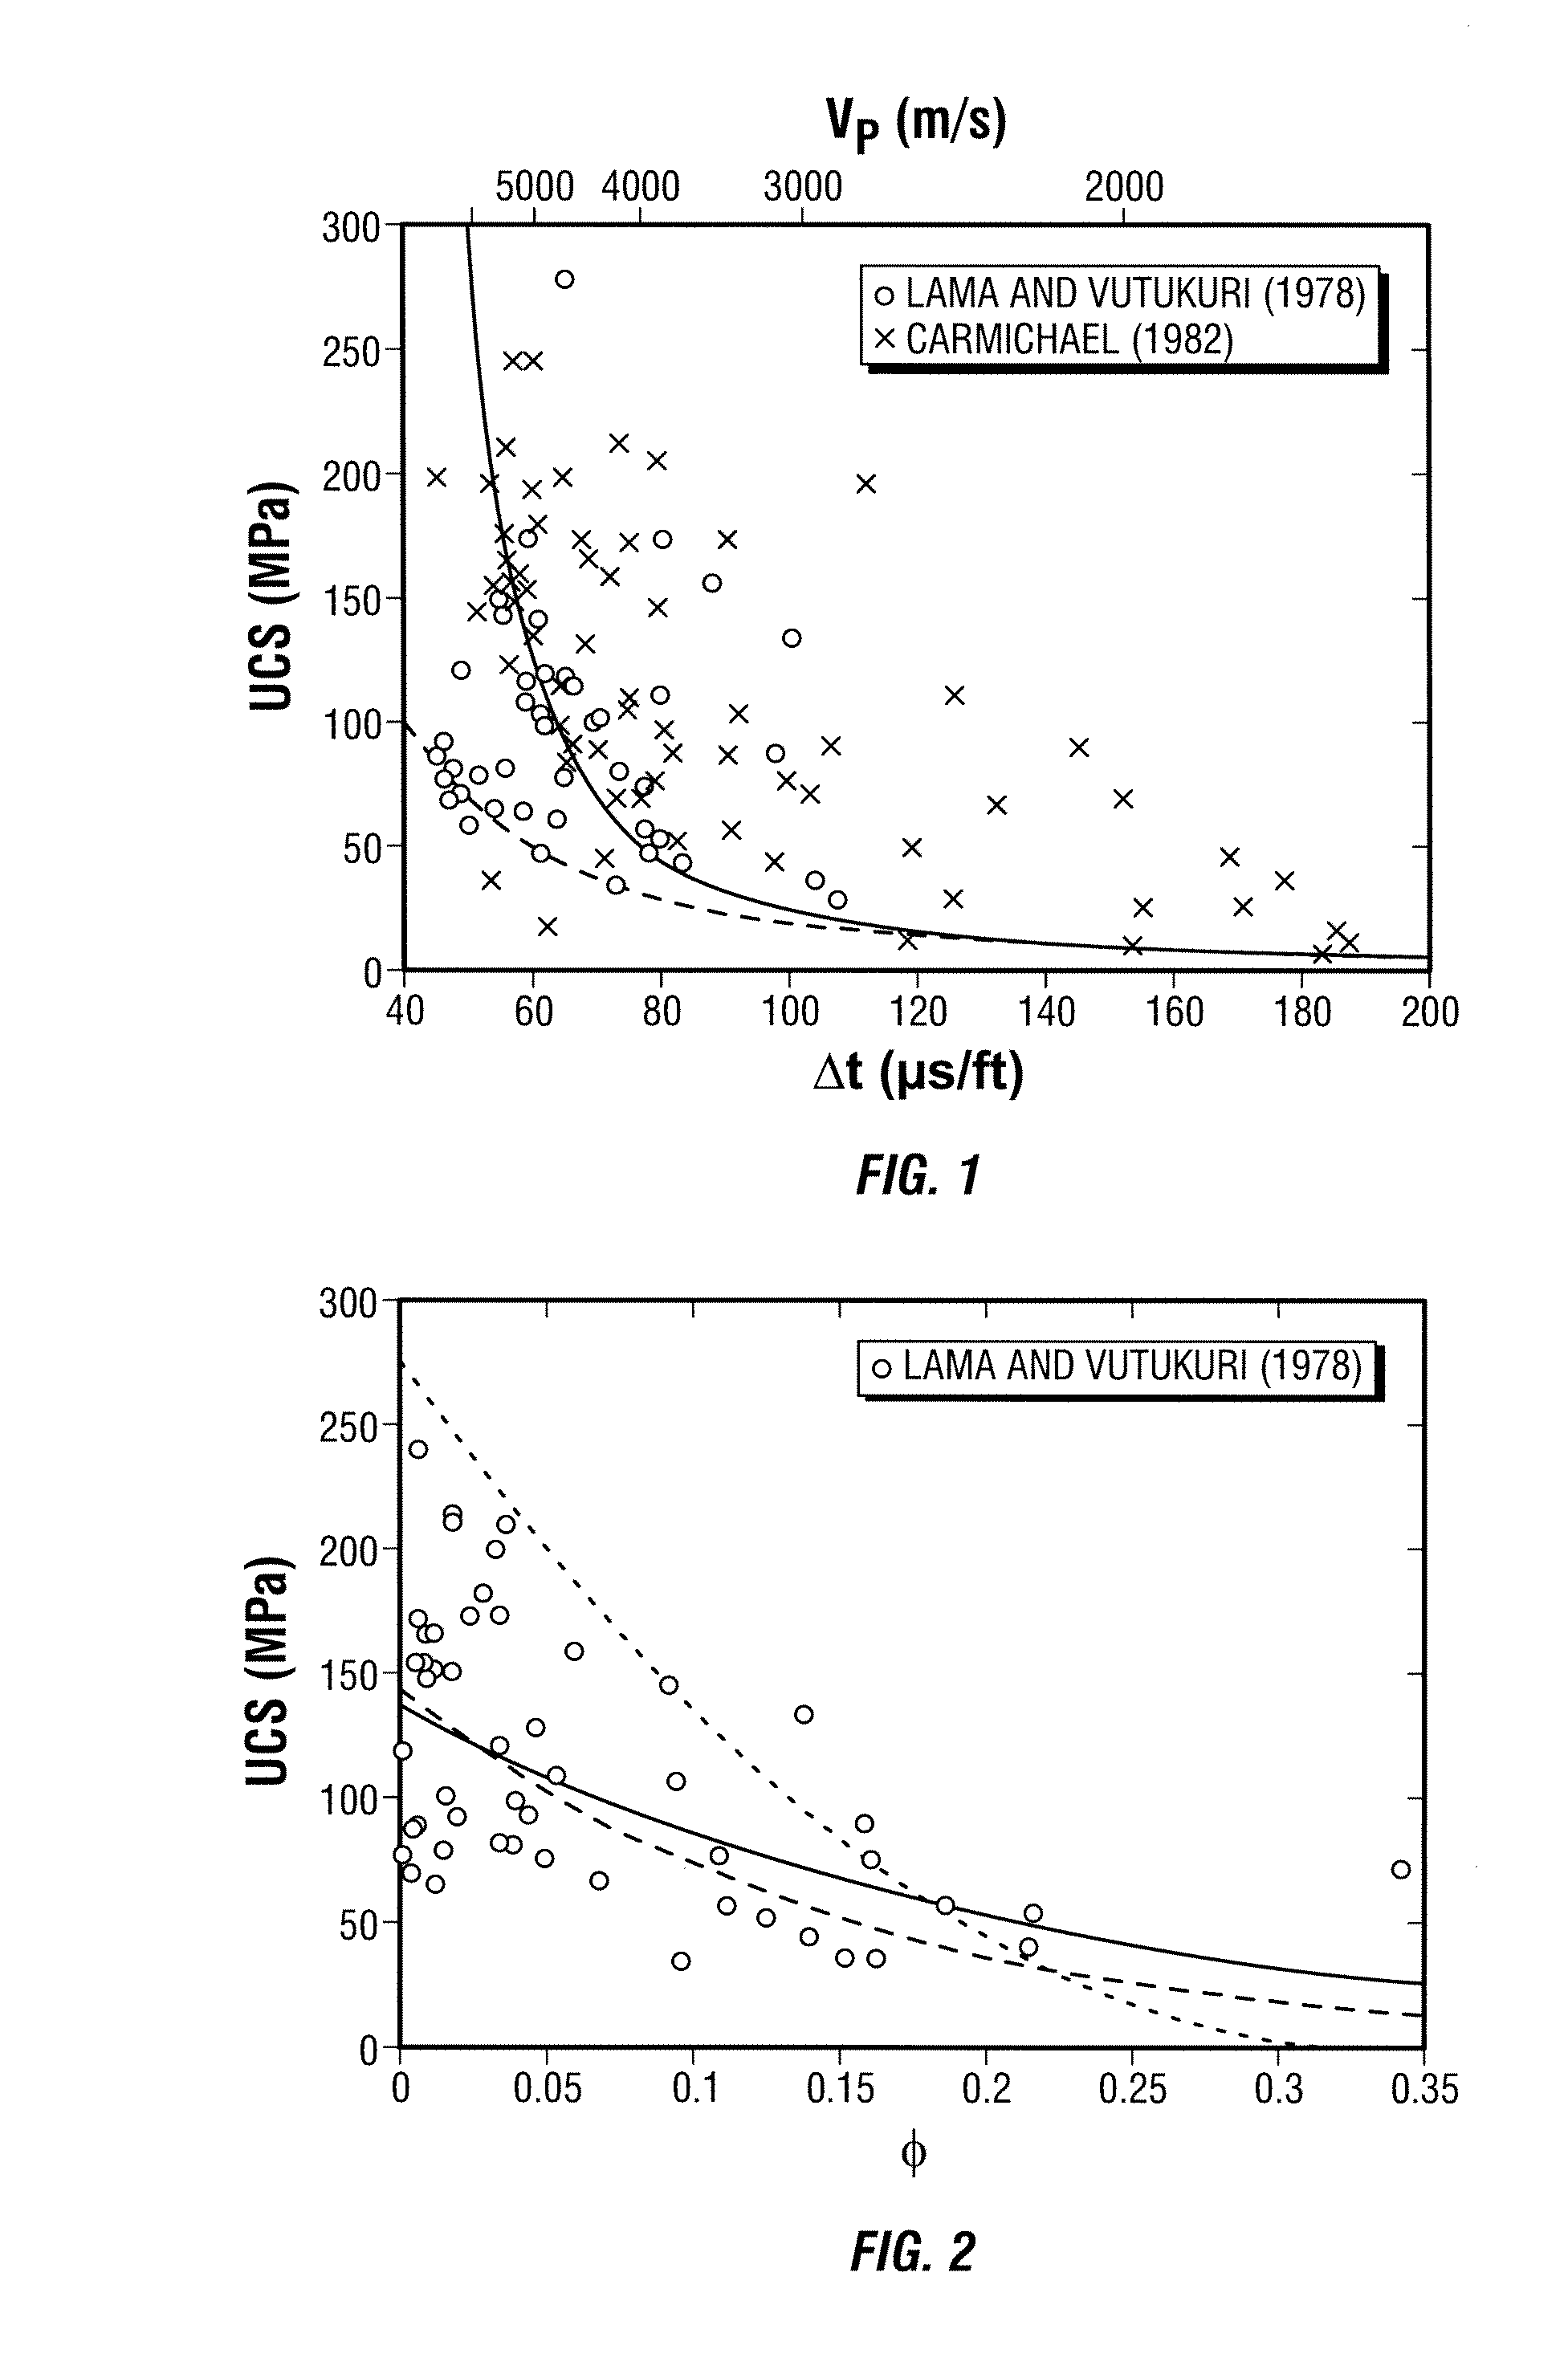 Method to determine rock properties from drilling logs